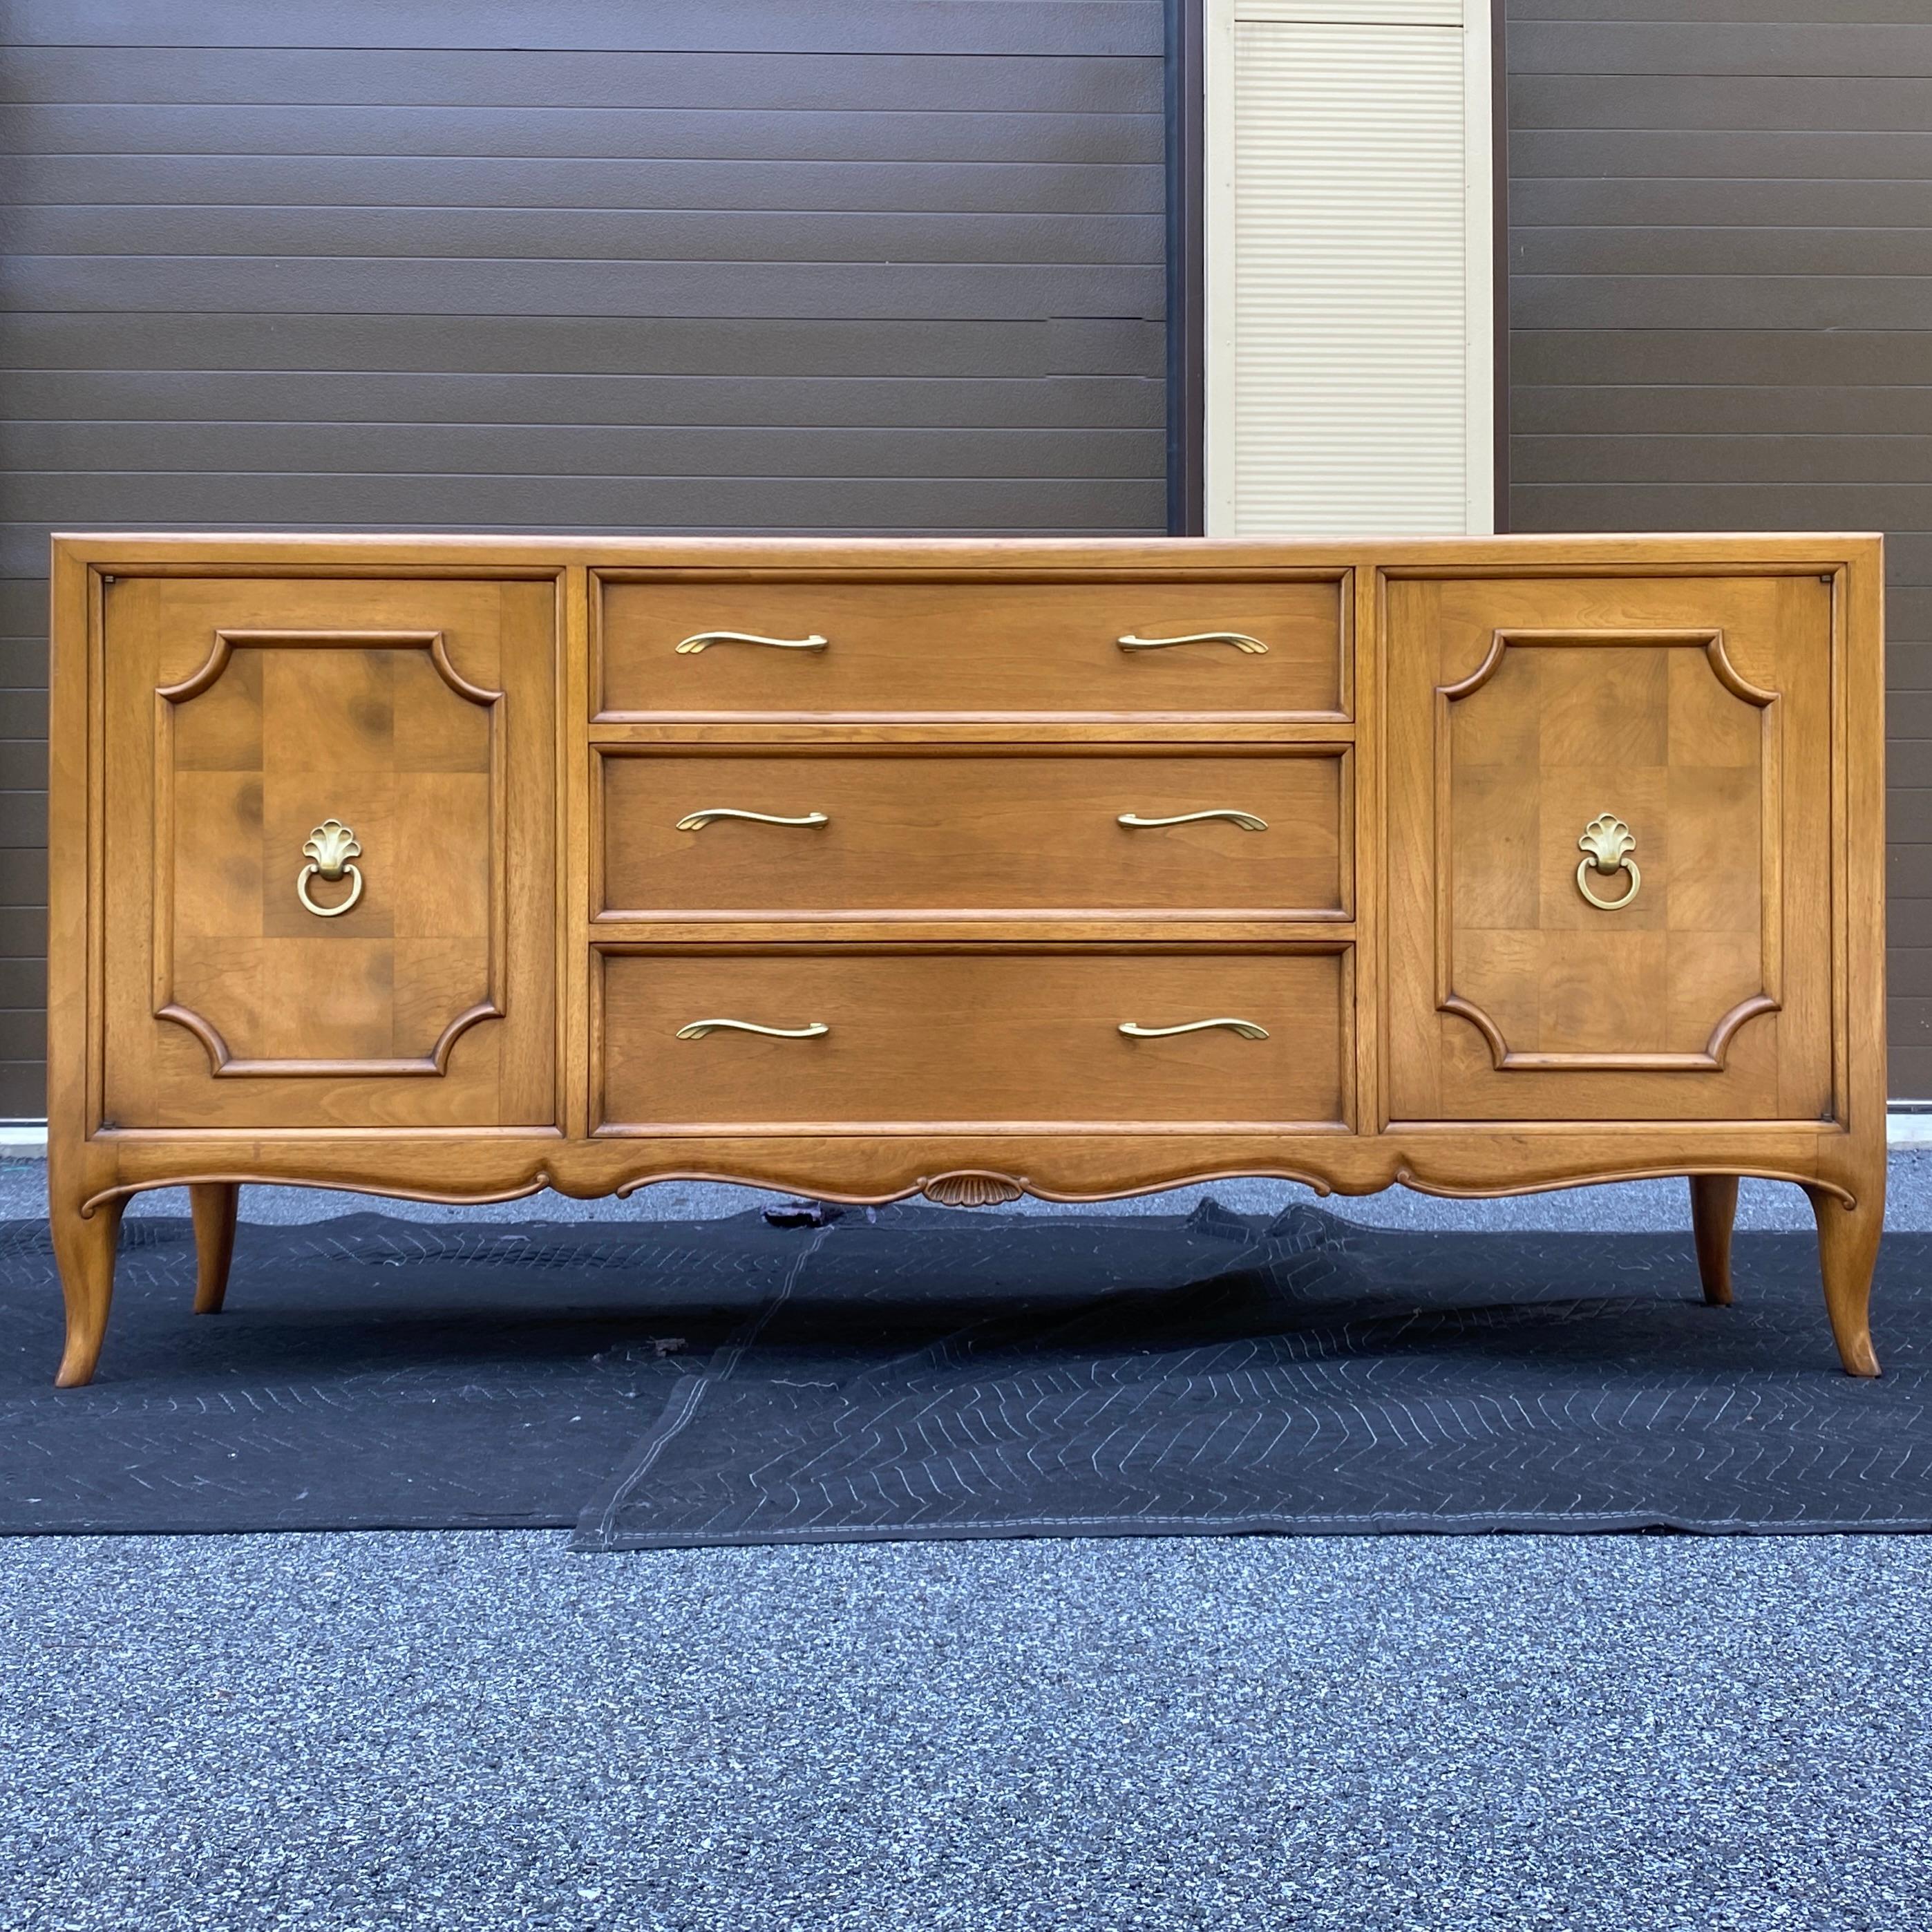 High end walnut credenza by Mount Airy Furniture for John Stuart featuring patchwork walnut burl door panels and unique large brass hardware. Functional and versatile storage configuration of three large center drawers with cabinets on either end